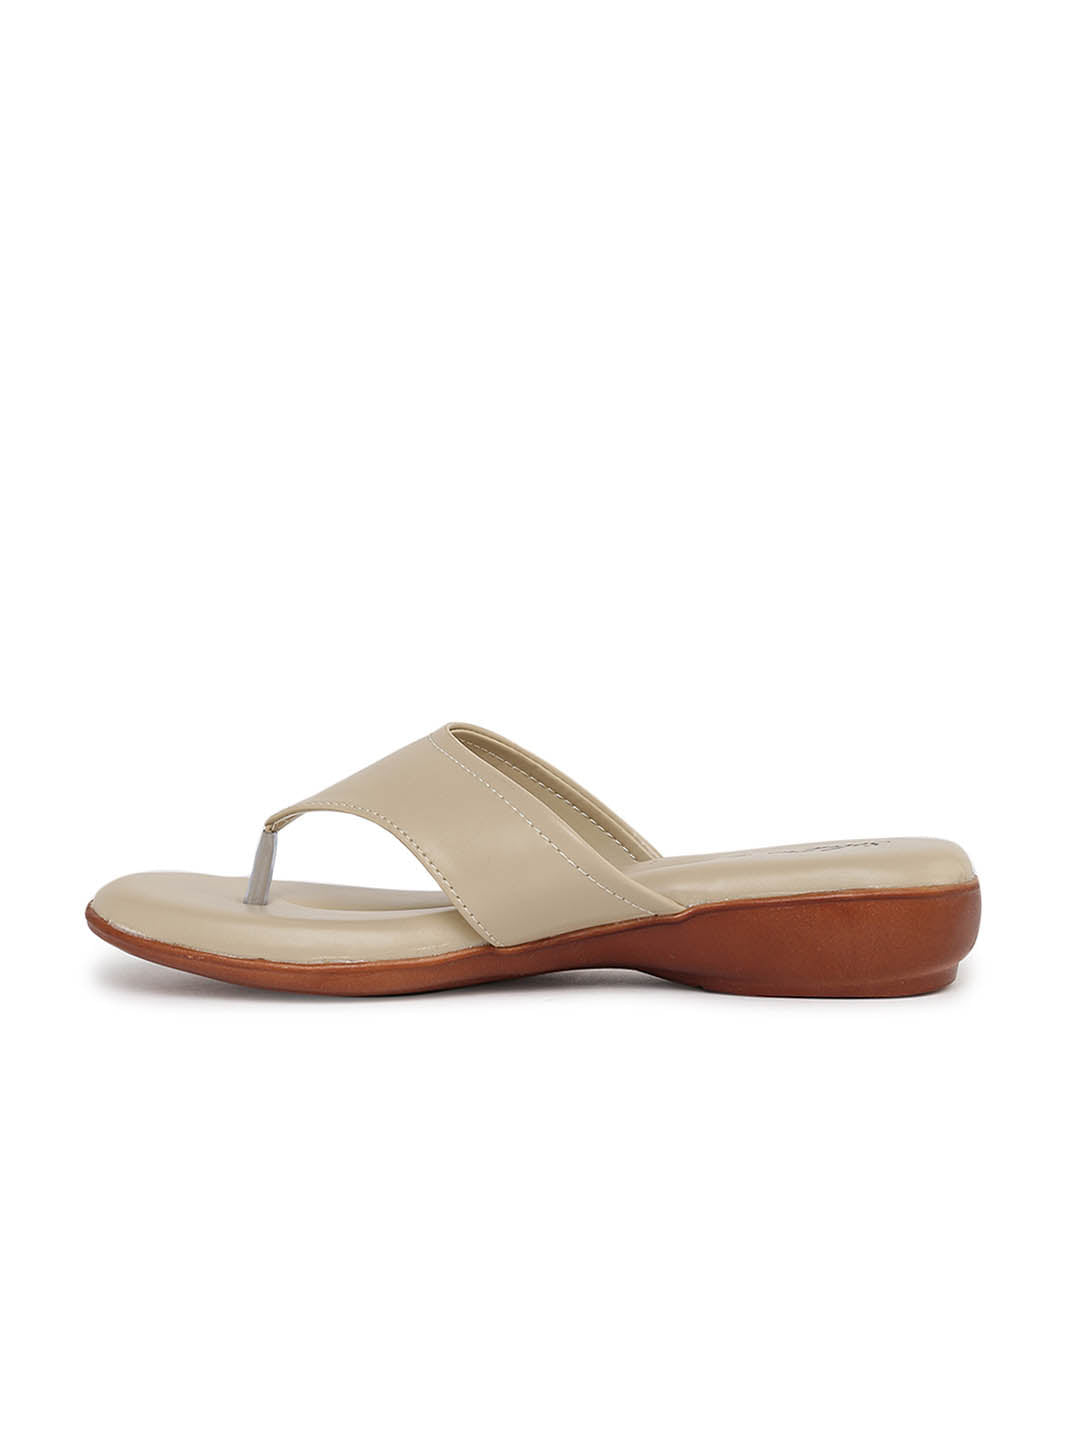 Paragon R10547L Women Sandals | Casual &amp; Formal Sandals | Stylish, Comfortable &amp; Durable | For Daily &amp; Occasion Wear